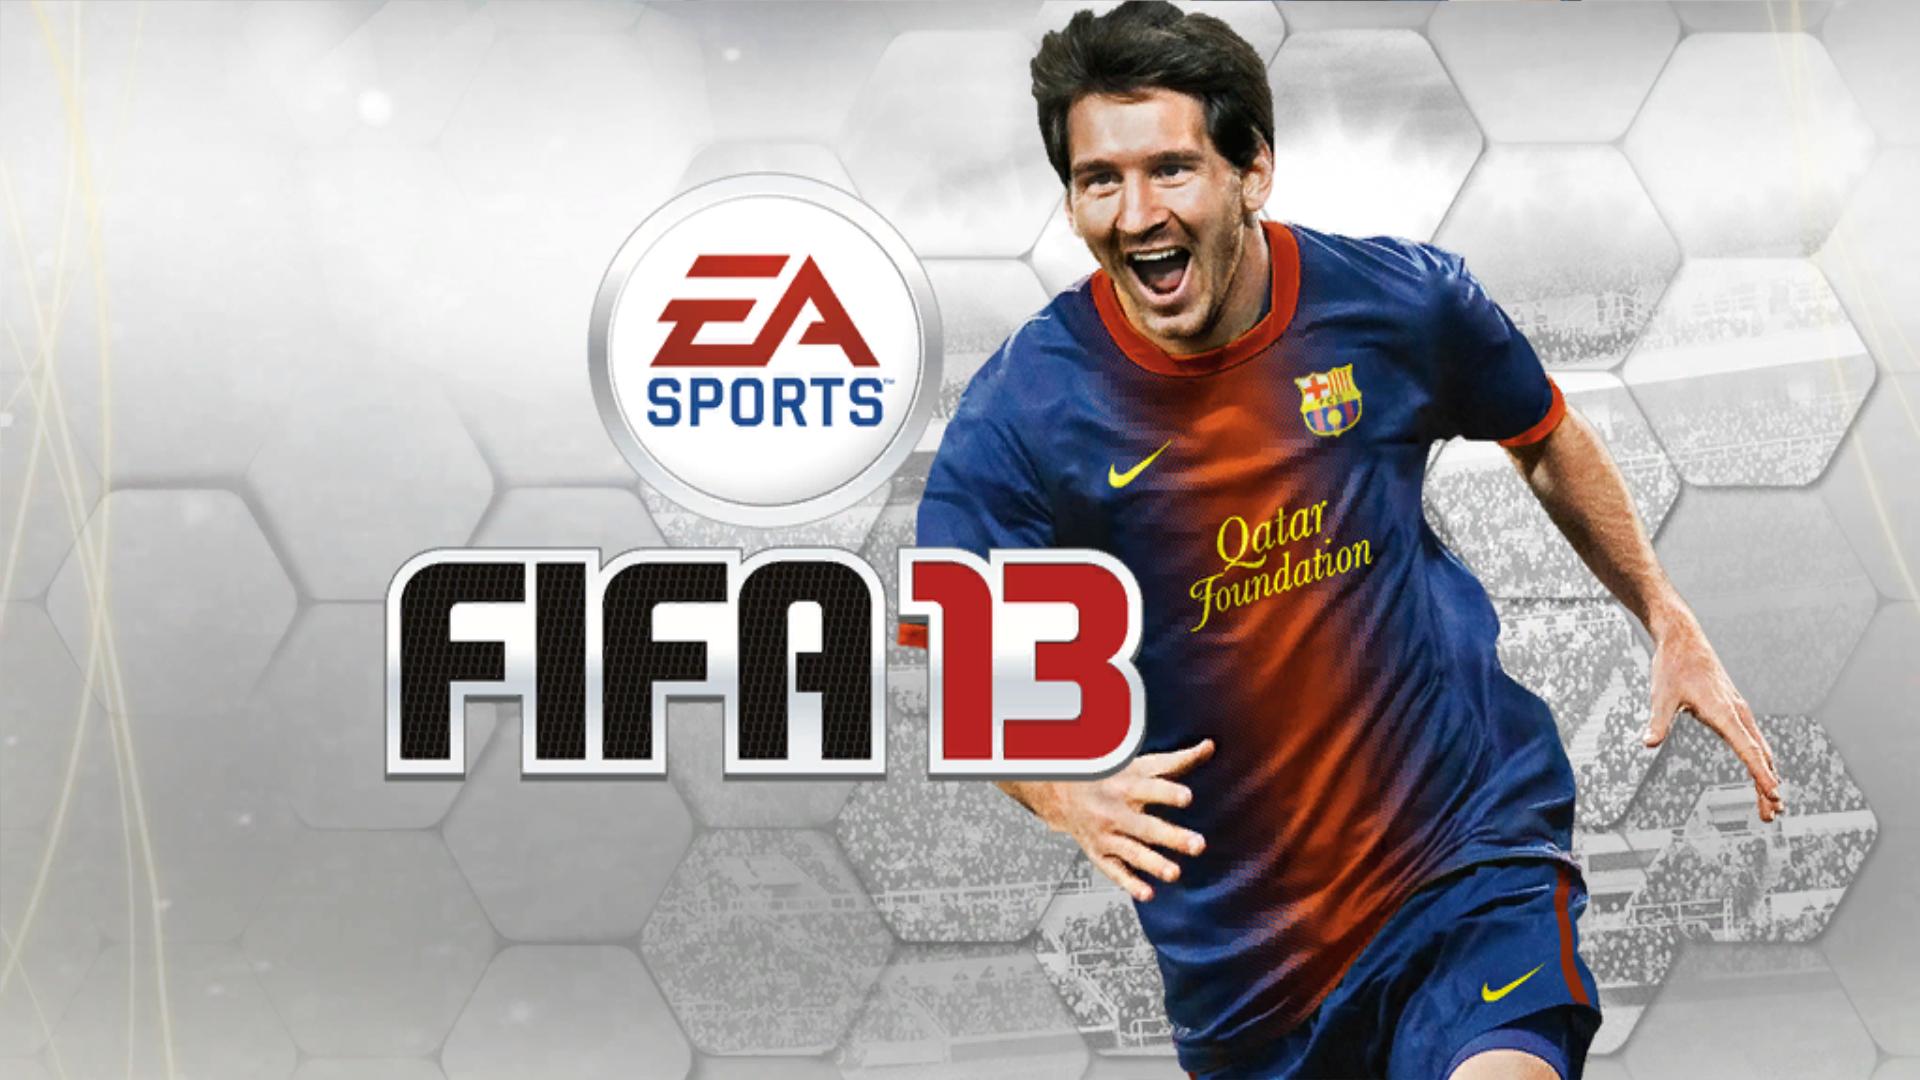 30 High Quality FIFA Wallpapers For Desktop